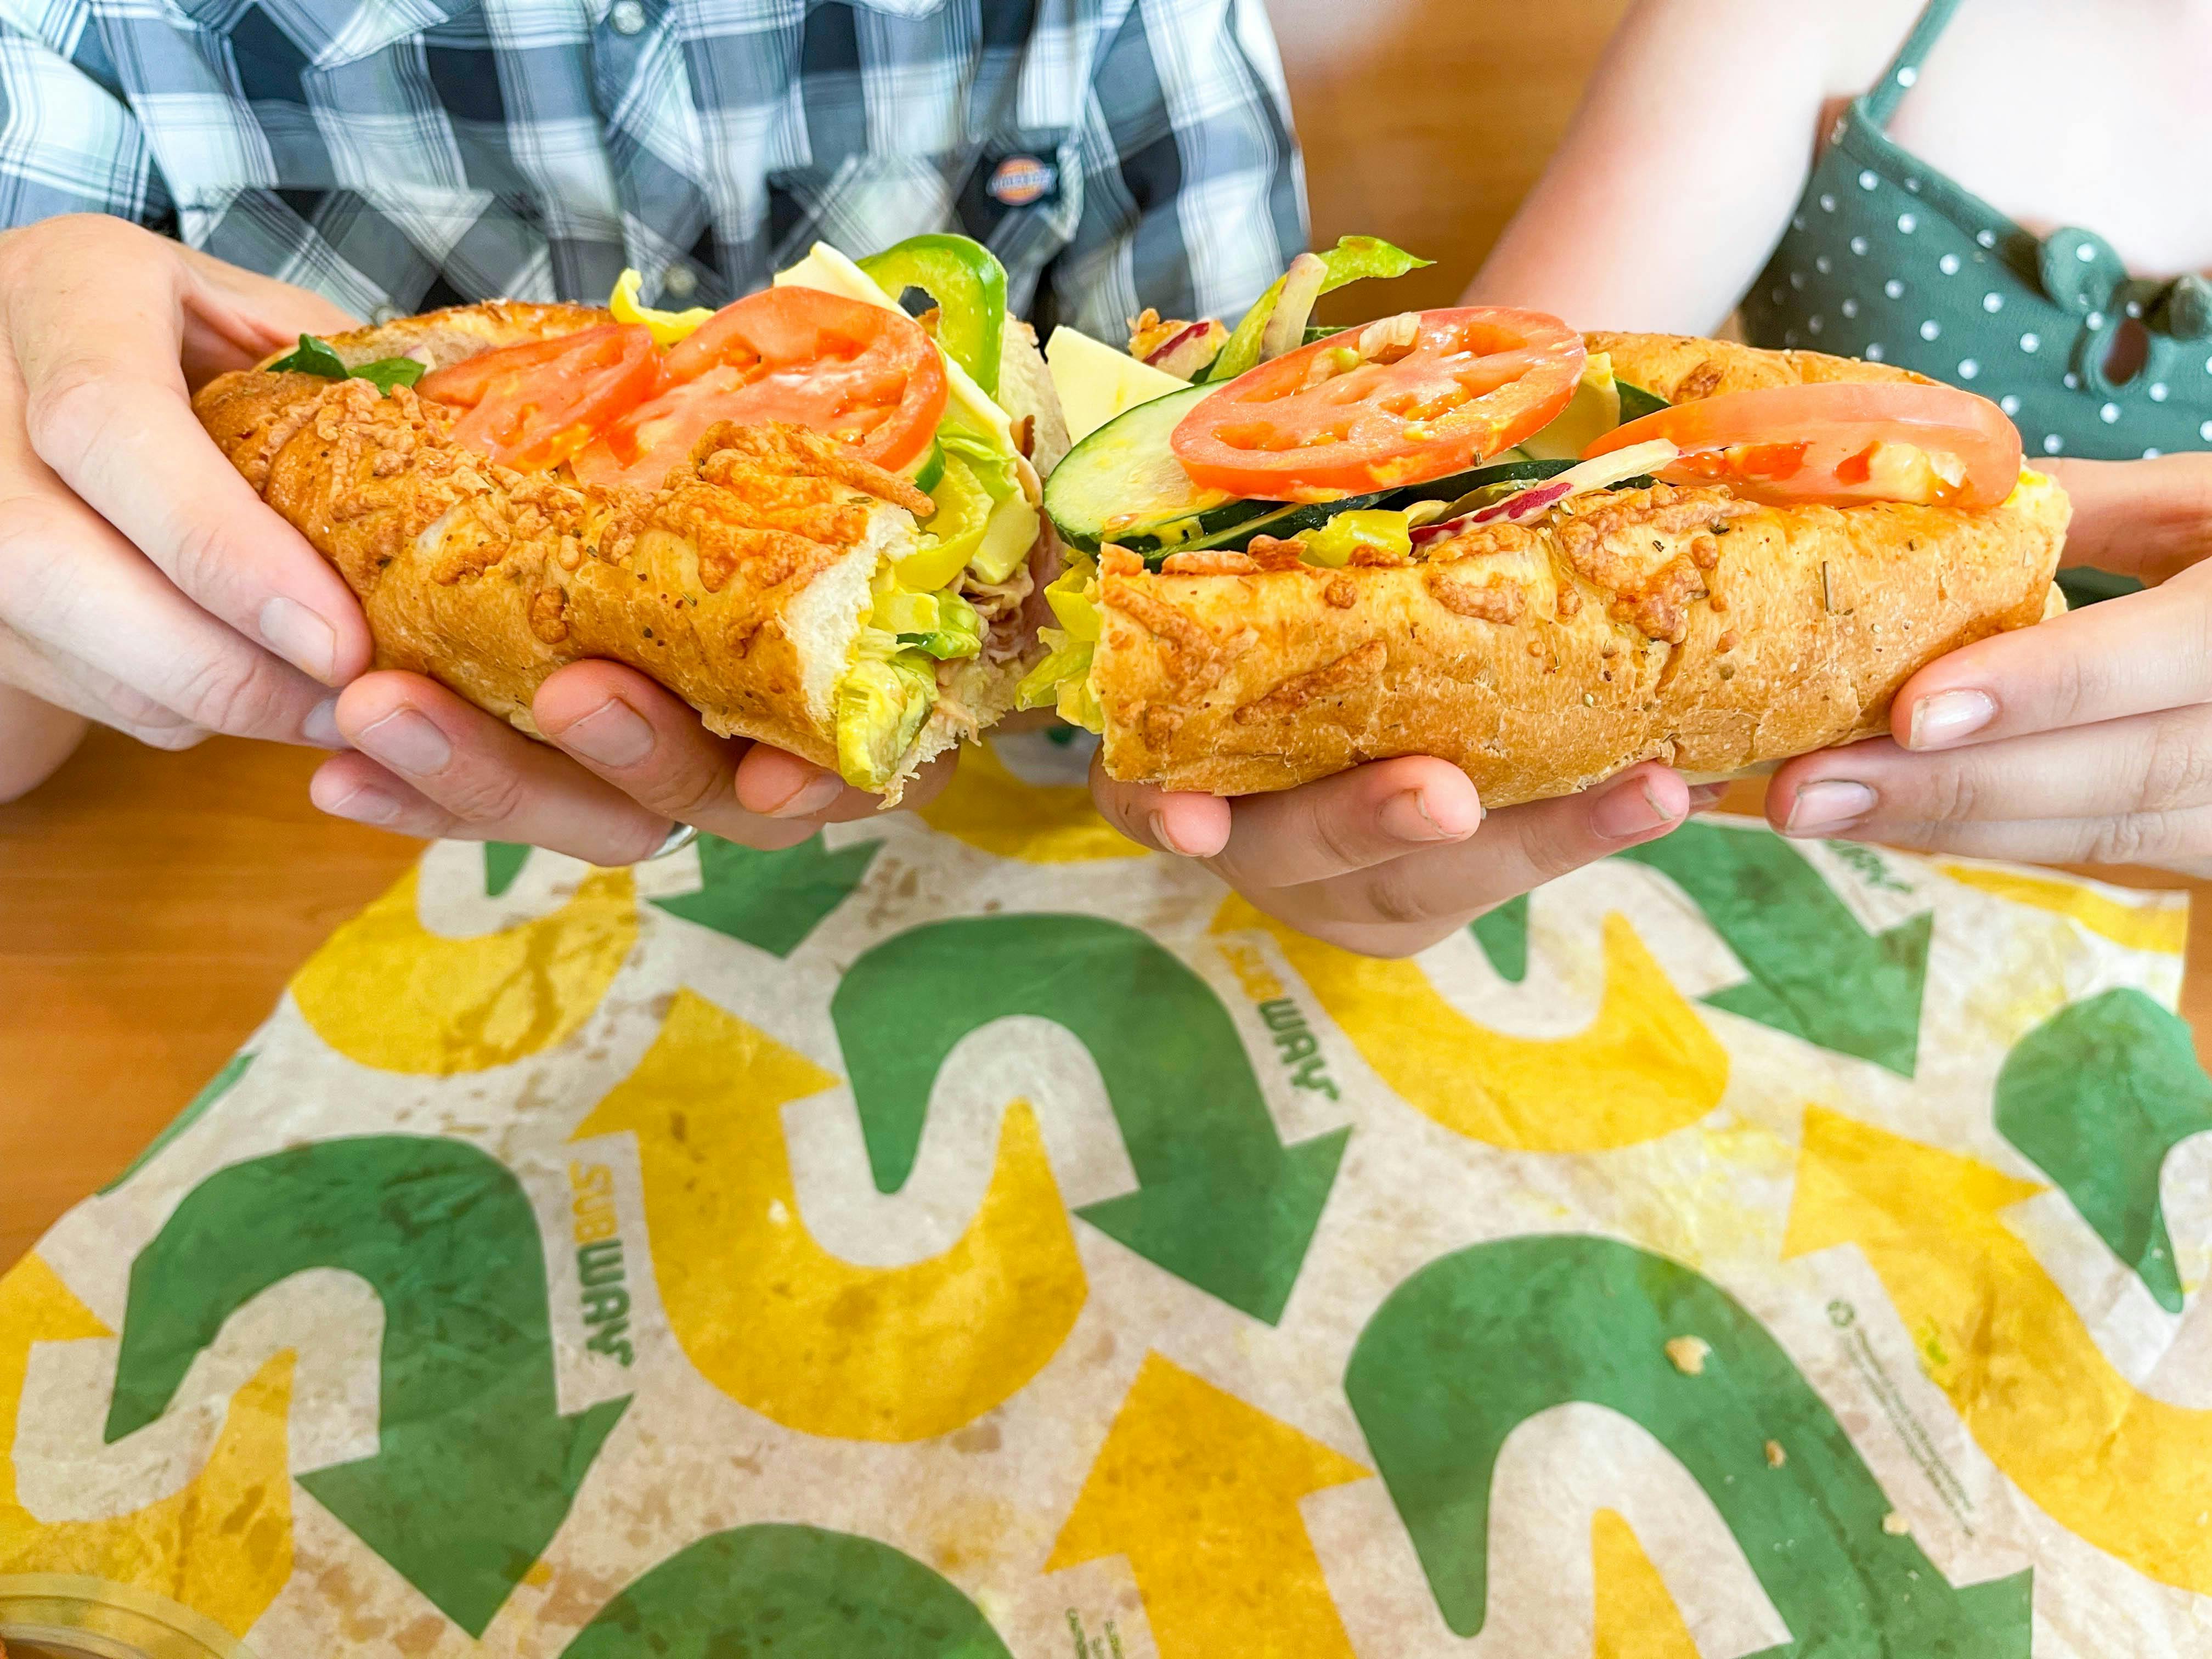 subway-coupons-buy-one-footlong-get-one-50-off-until-april-30-2023